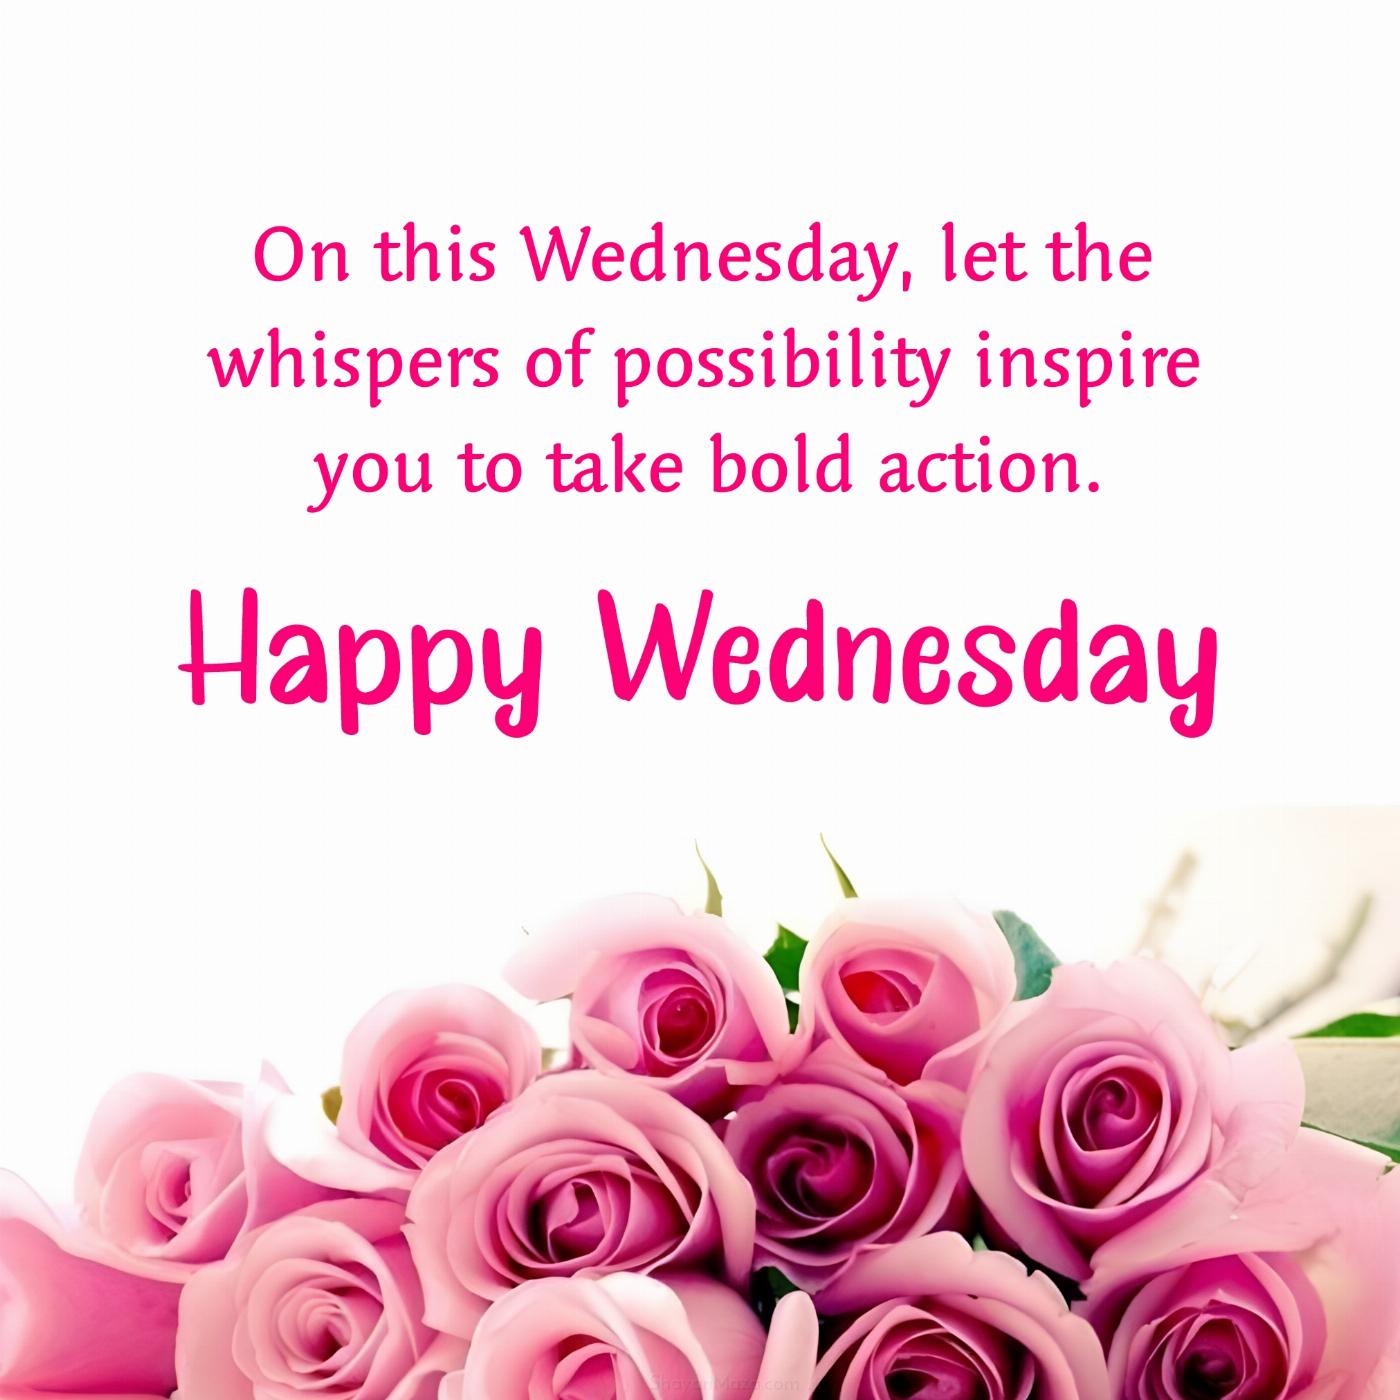 On this Wednesday let the whispers of possibility inspire you to take bold action